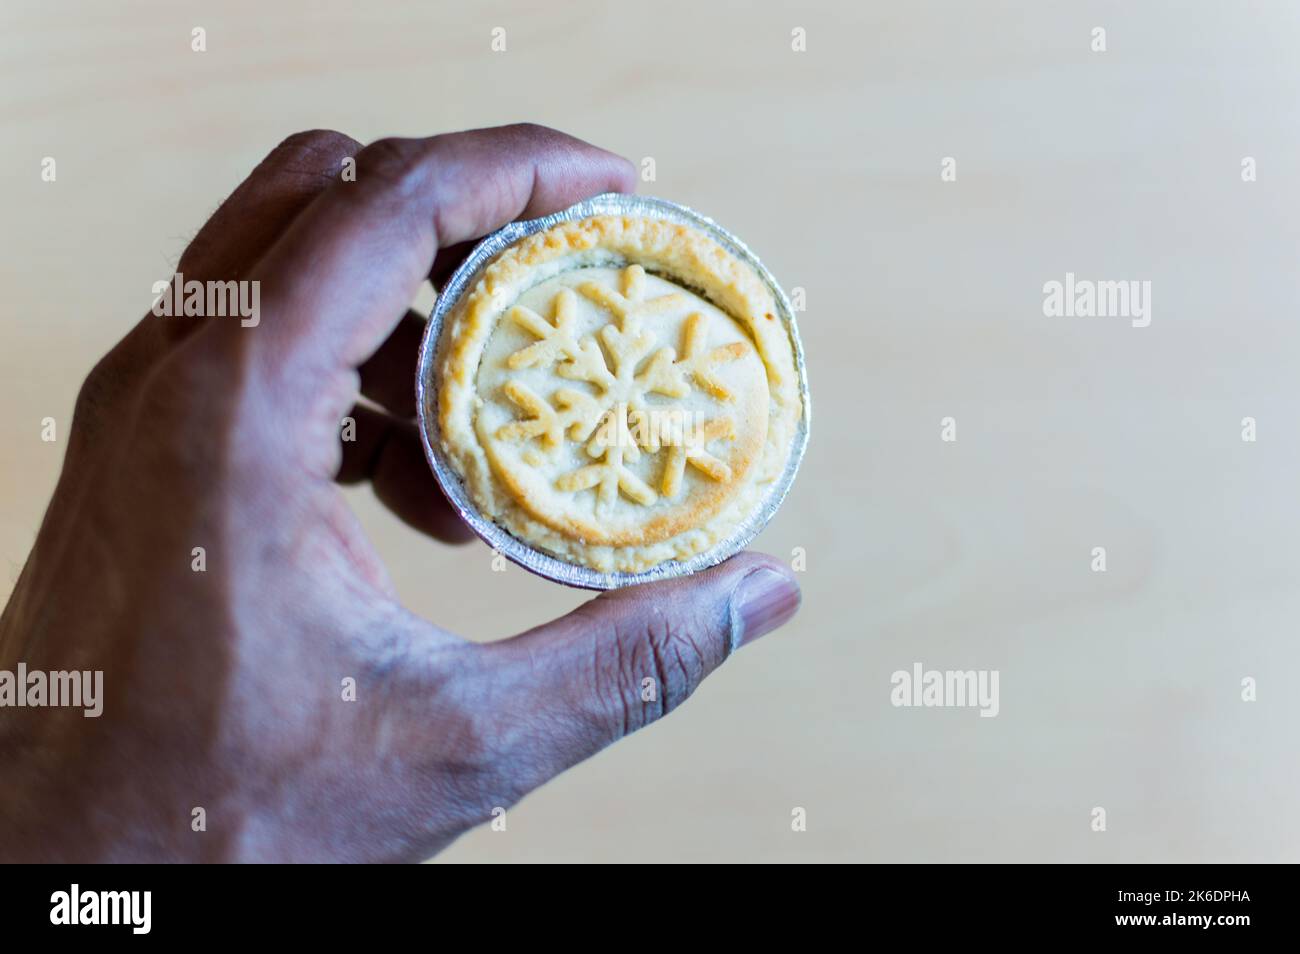 Adult male holding a minced fruit pie with festival decoration on top Stock Photo